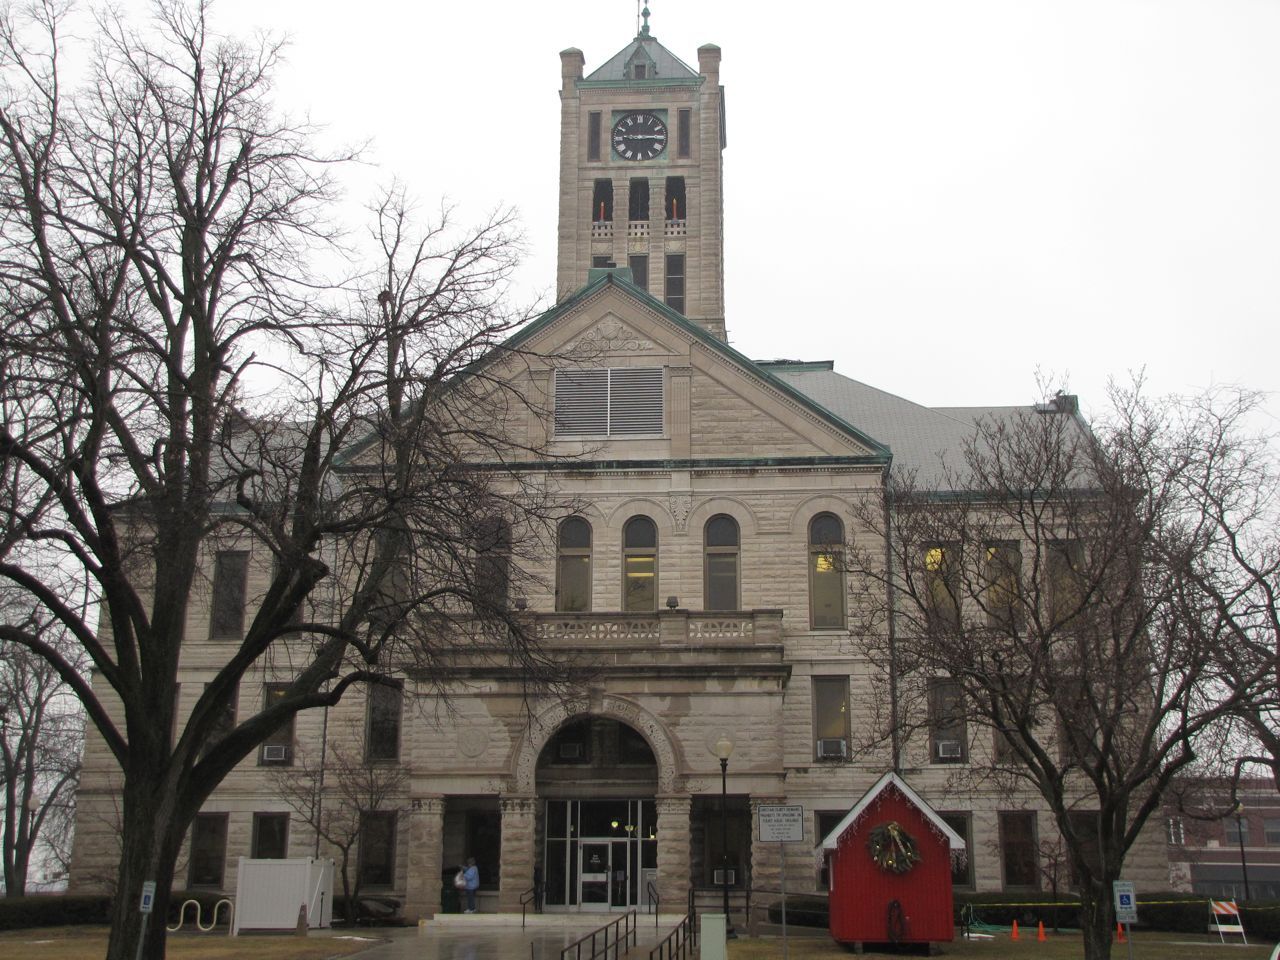 The Christian County Courthouse was built in Taylorville in 1902 for $100,535.80.